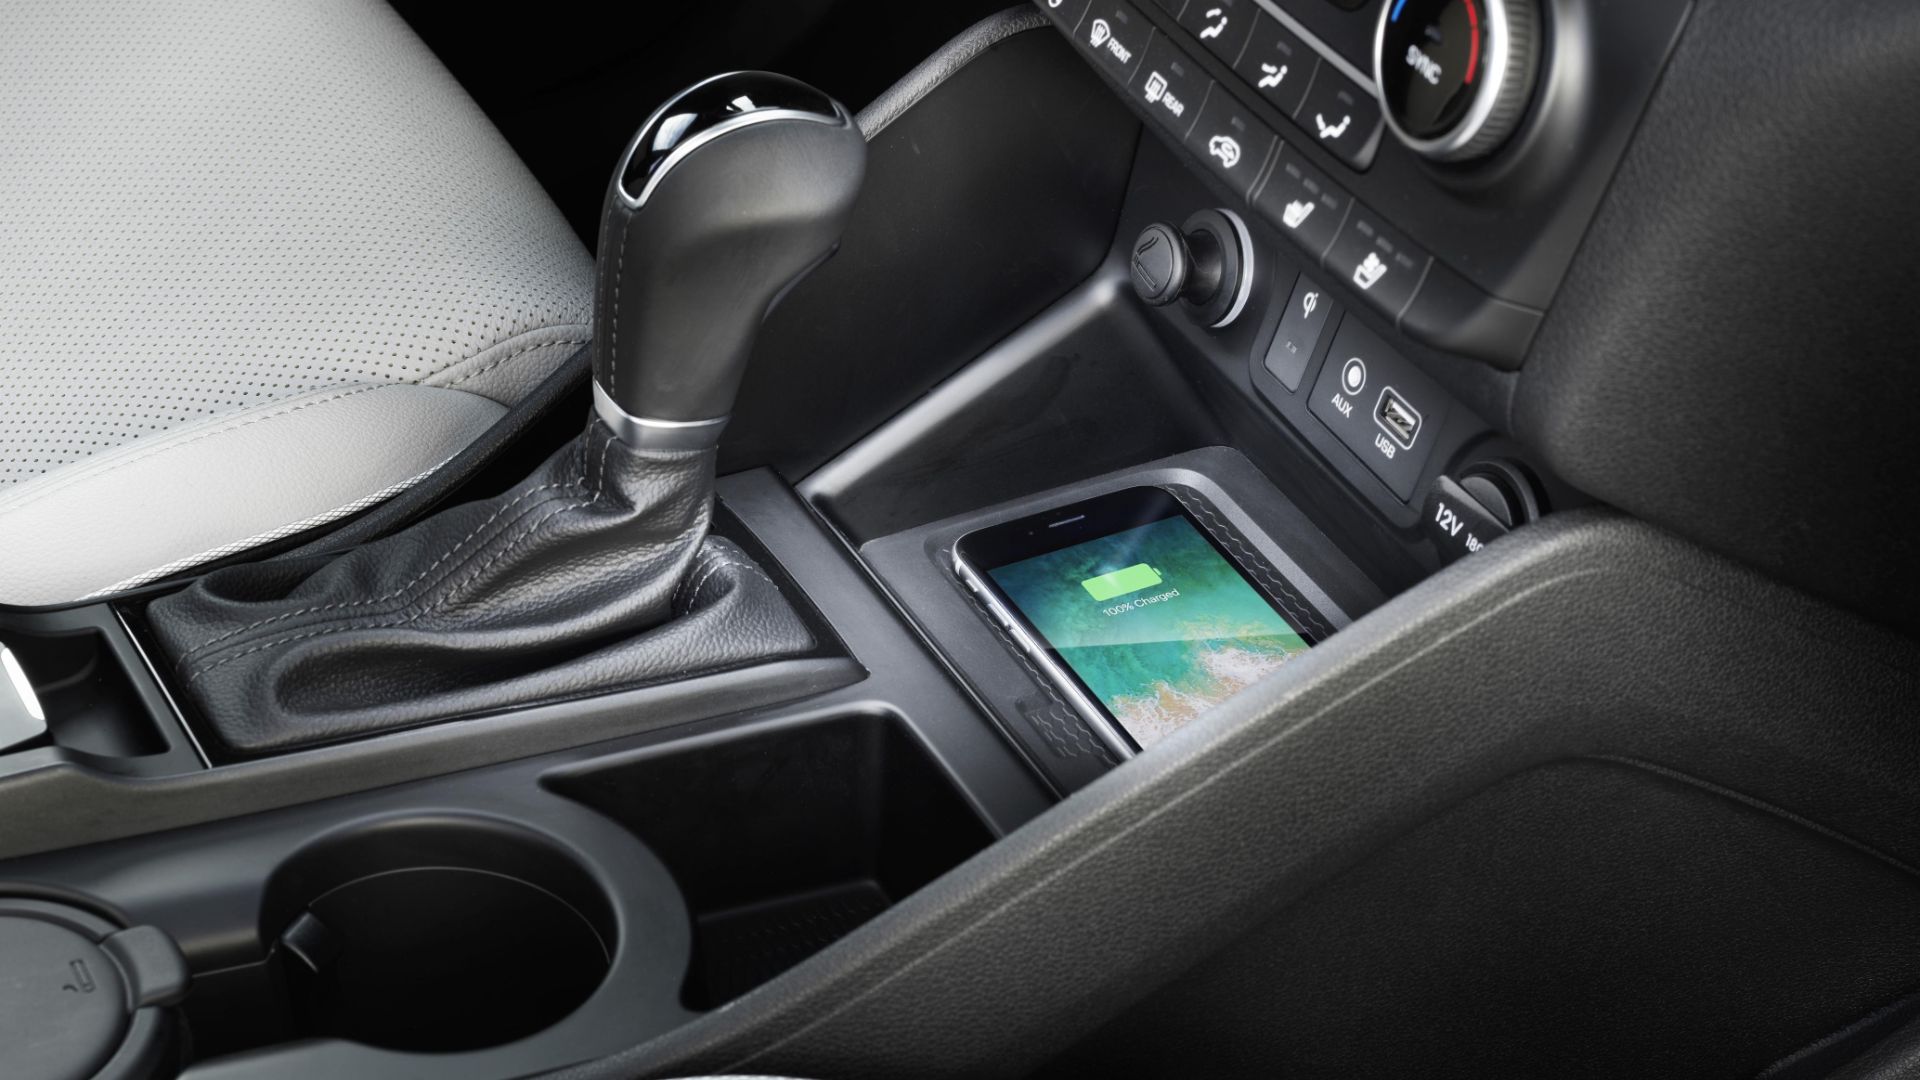 Add wireless charging to your car